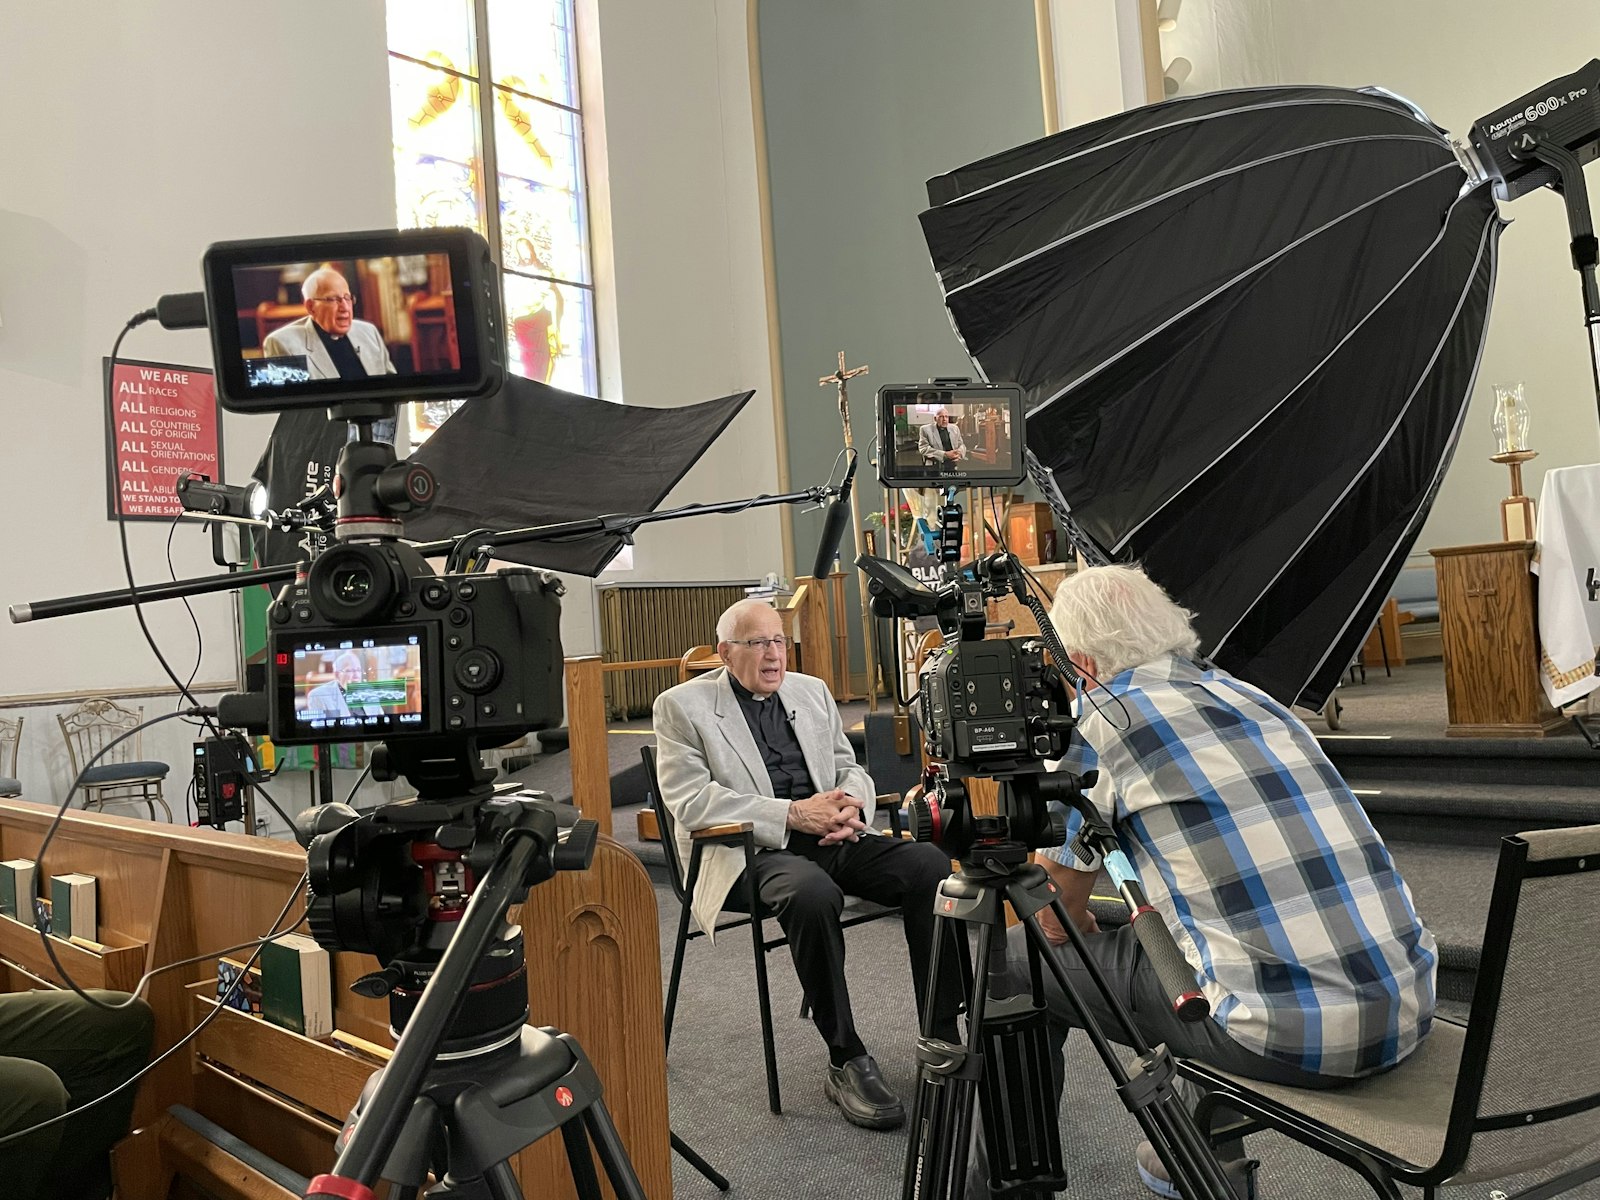 With the help of Fr. Norman Thomas, the 92-year-old leader of Sacred Heart Catholic Church, the film explores Detroit’s impact on civil rights, including the 1967 riots.